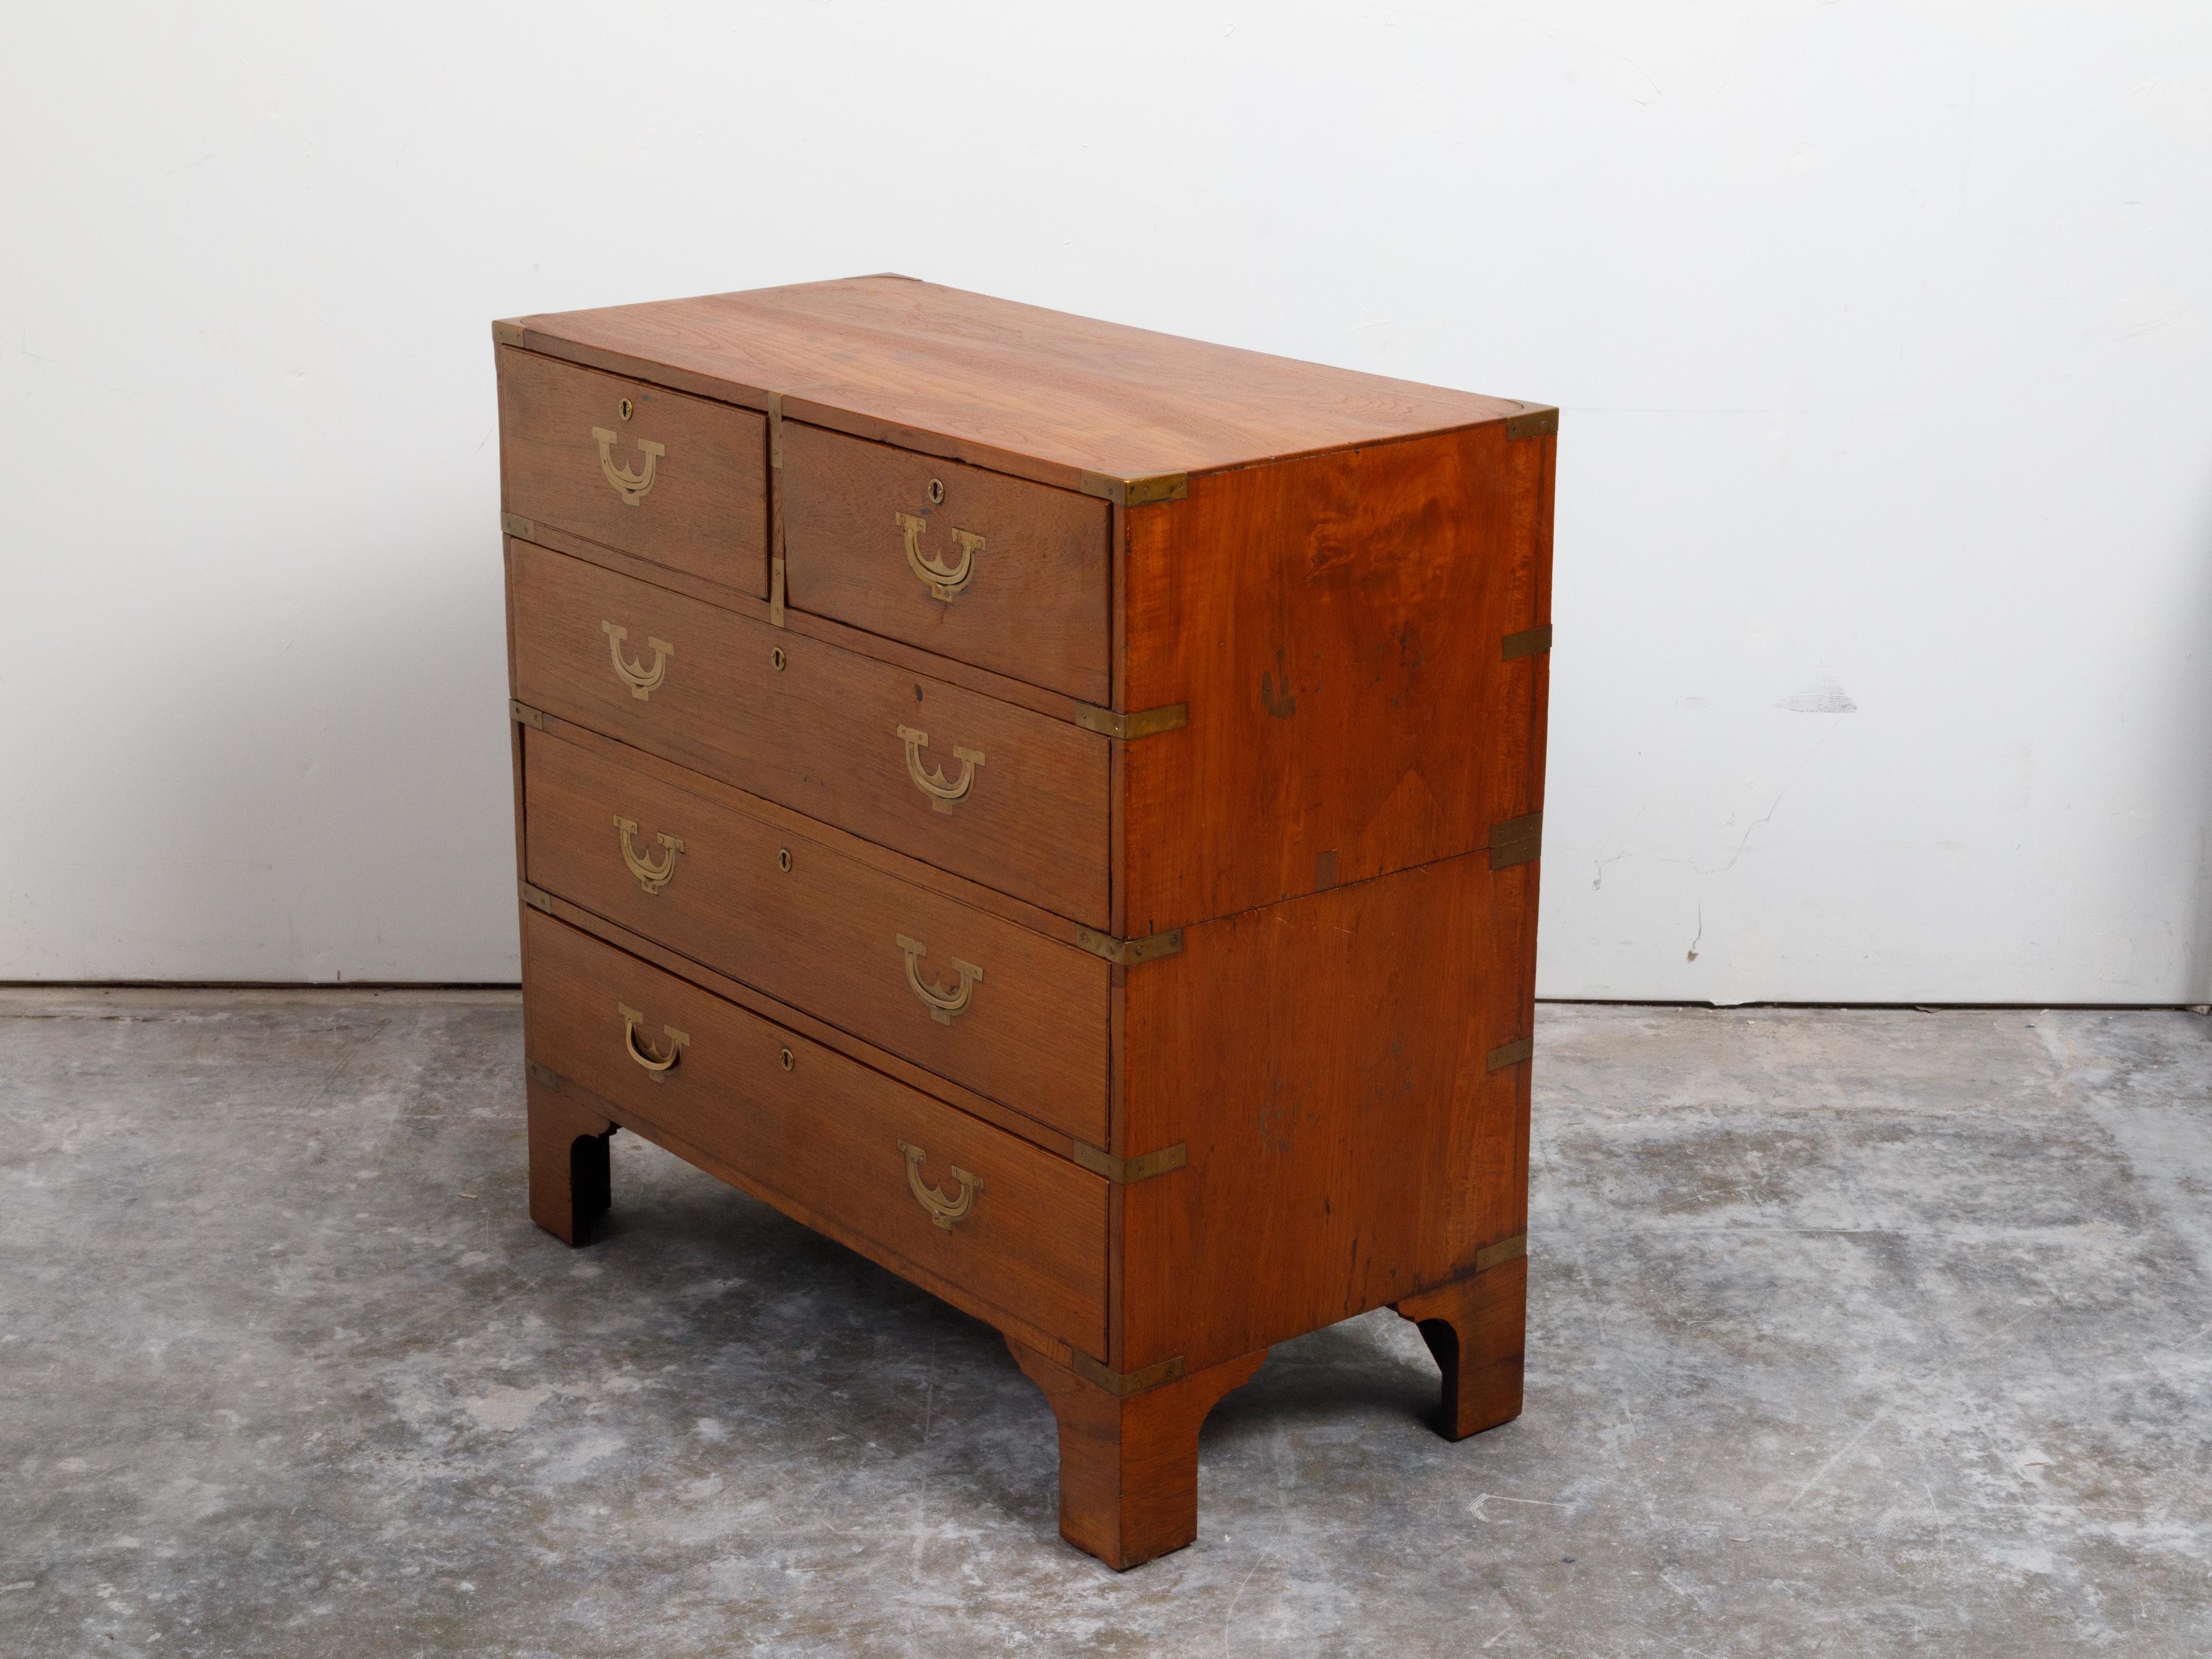 English 19th Century Teak Campaign Chest with Five Drawers and Brass Hardware For Sale 12